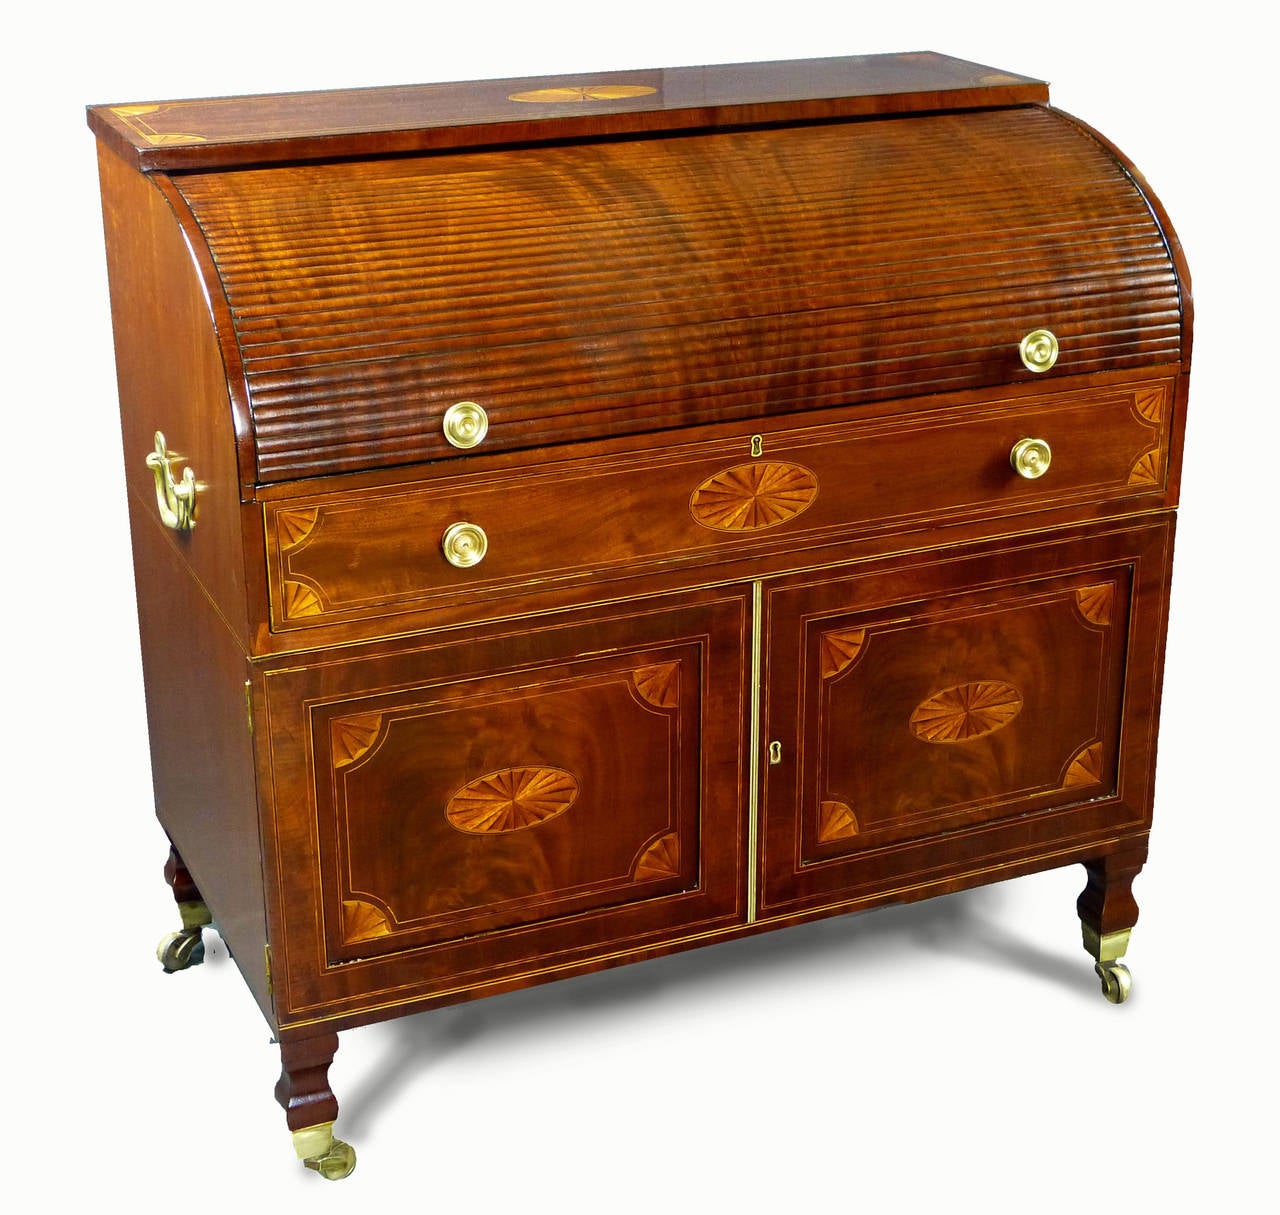 Fine and rare roll-top tambour bureau desk of the George III period, the tambour made out of a single piece of figured mahogany cut into strips and moulded. The entire bureau is constructed of finely figured mahogany decorated with oval paterae,